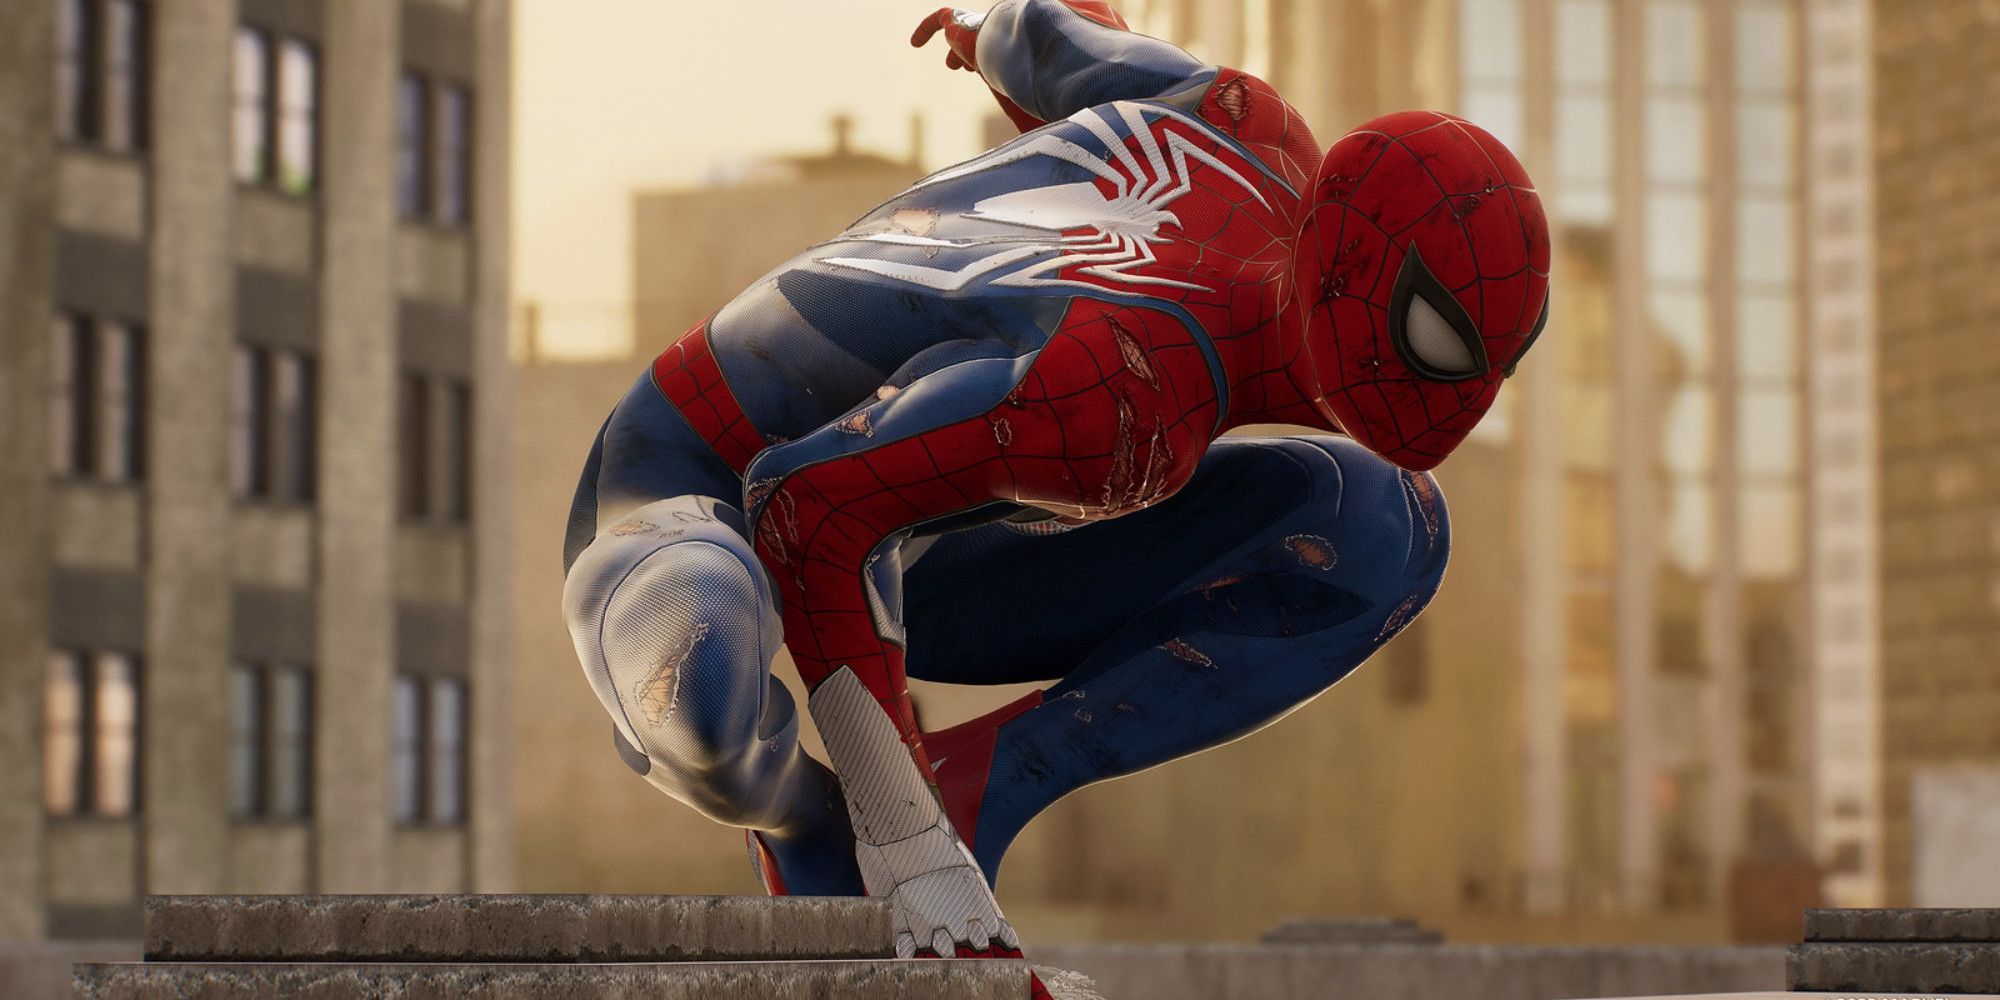 Peter Parker perching on a building in a damaged Spider-Man suit